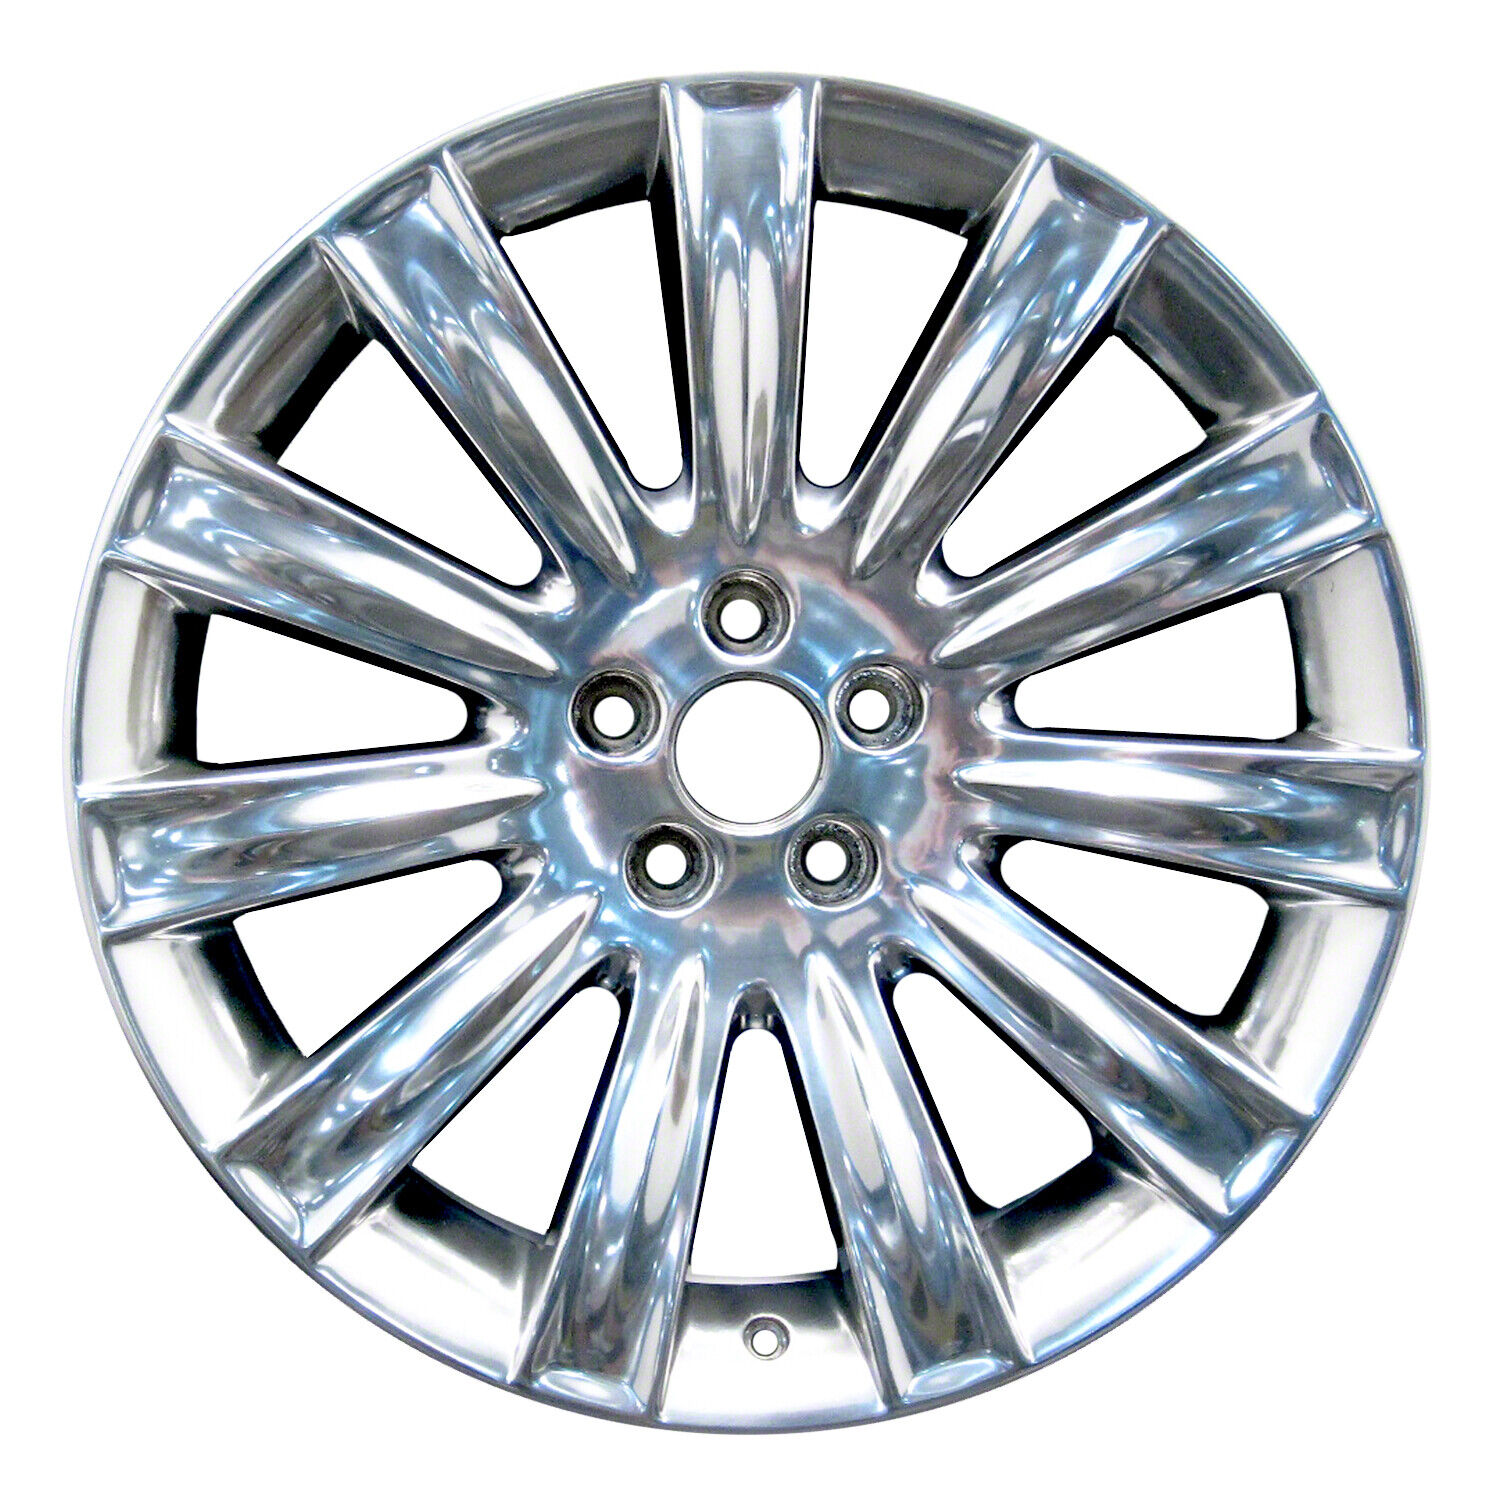 03764 Reconditioned OEM Aluminum Wheel 20x8 fits 2009-2011 Lincoln MKS